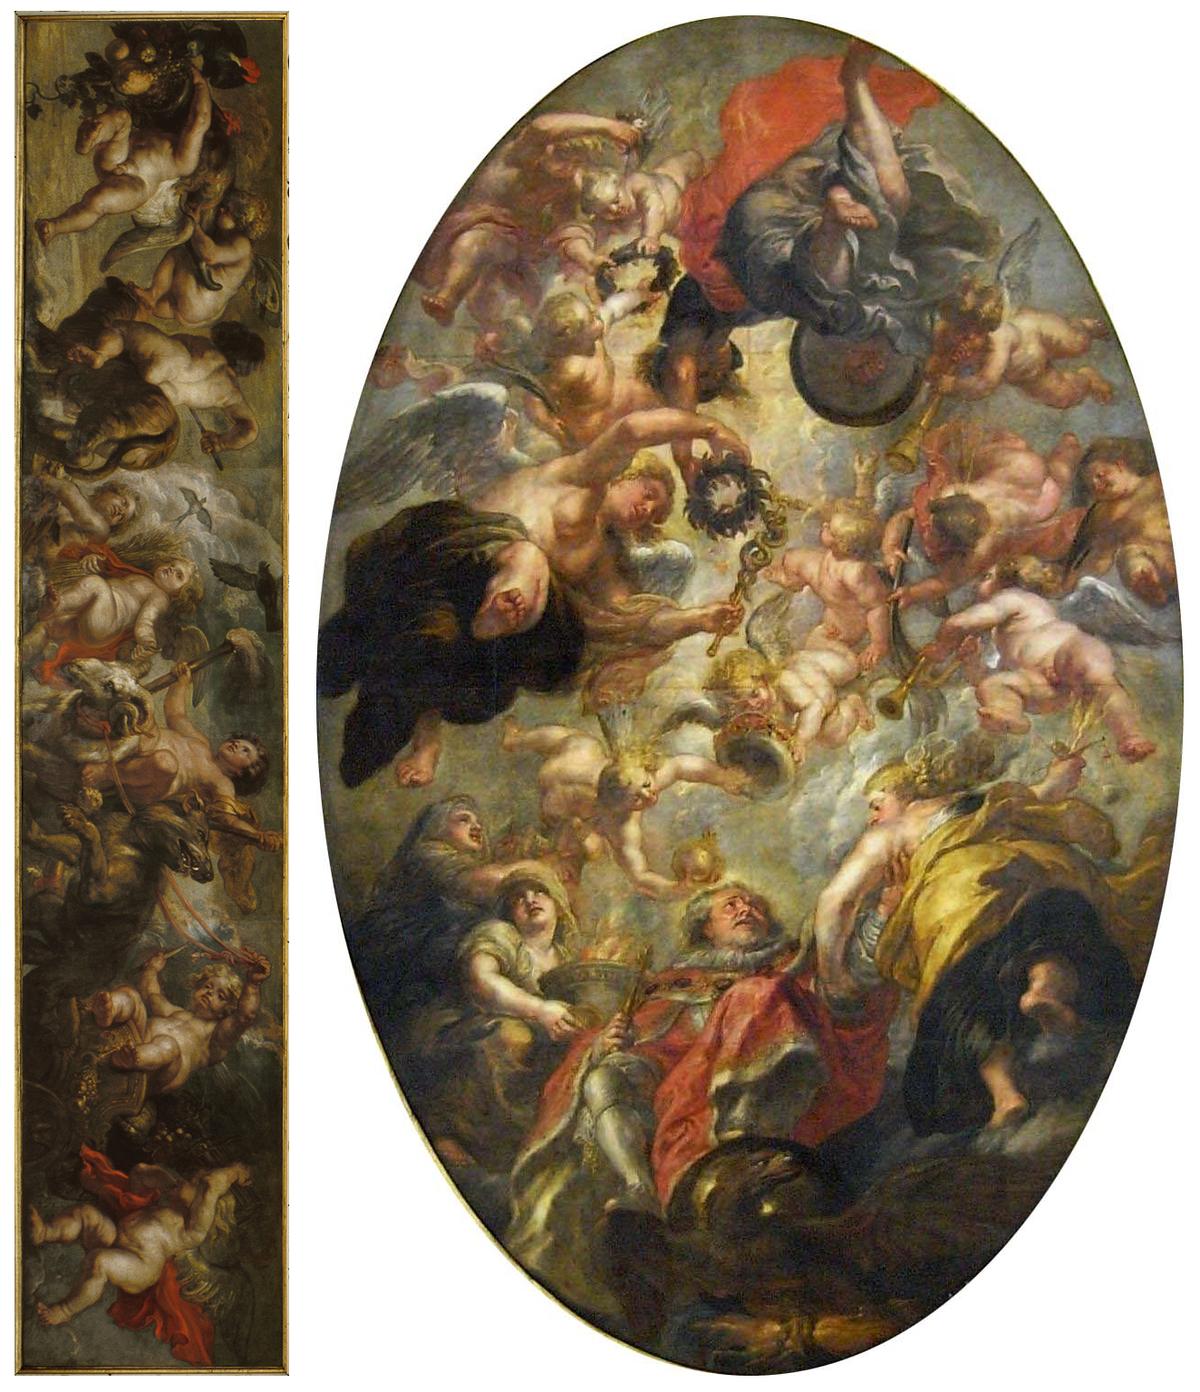 (L) “Procession of Cherub” is one of two canvases flanking the central oval “The Apotheosis of James I,” the largest of the Banqueting Hall ceiling paintings, circa 1632-1634, by Peter Paul Rubens. Royal Collection. (Public Domain)